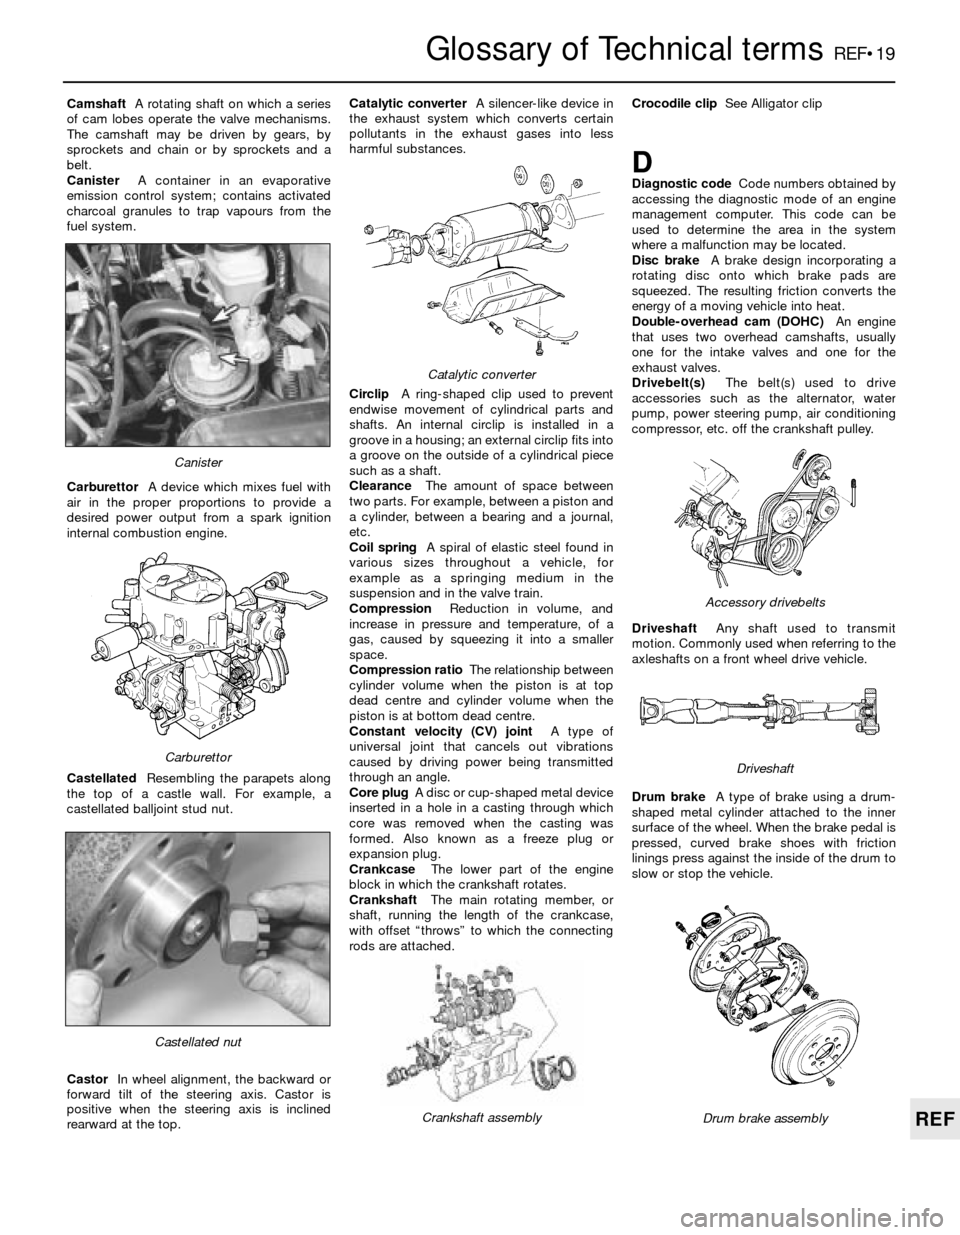 FORD SIERRA 1991 2.G Reference Workshop Manual Glossary of Technical termsREF•19
REF
CamshaftA rotating shaft on which a series
of cam lobes operate the valve mechanisms.
The camshaft may be driven by gears, by
sprockets and chain or by sprocket